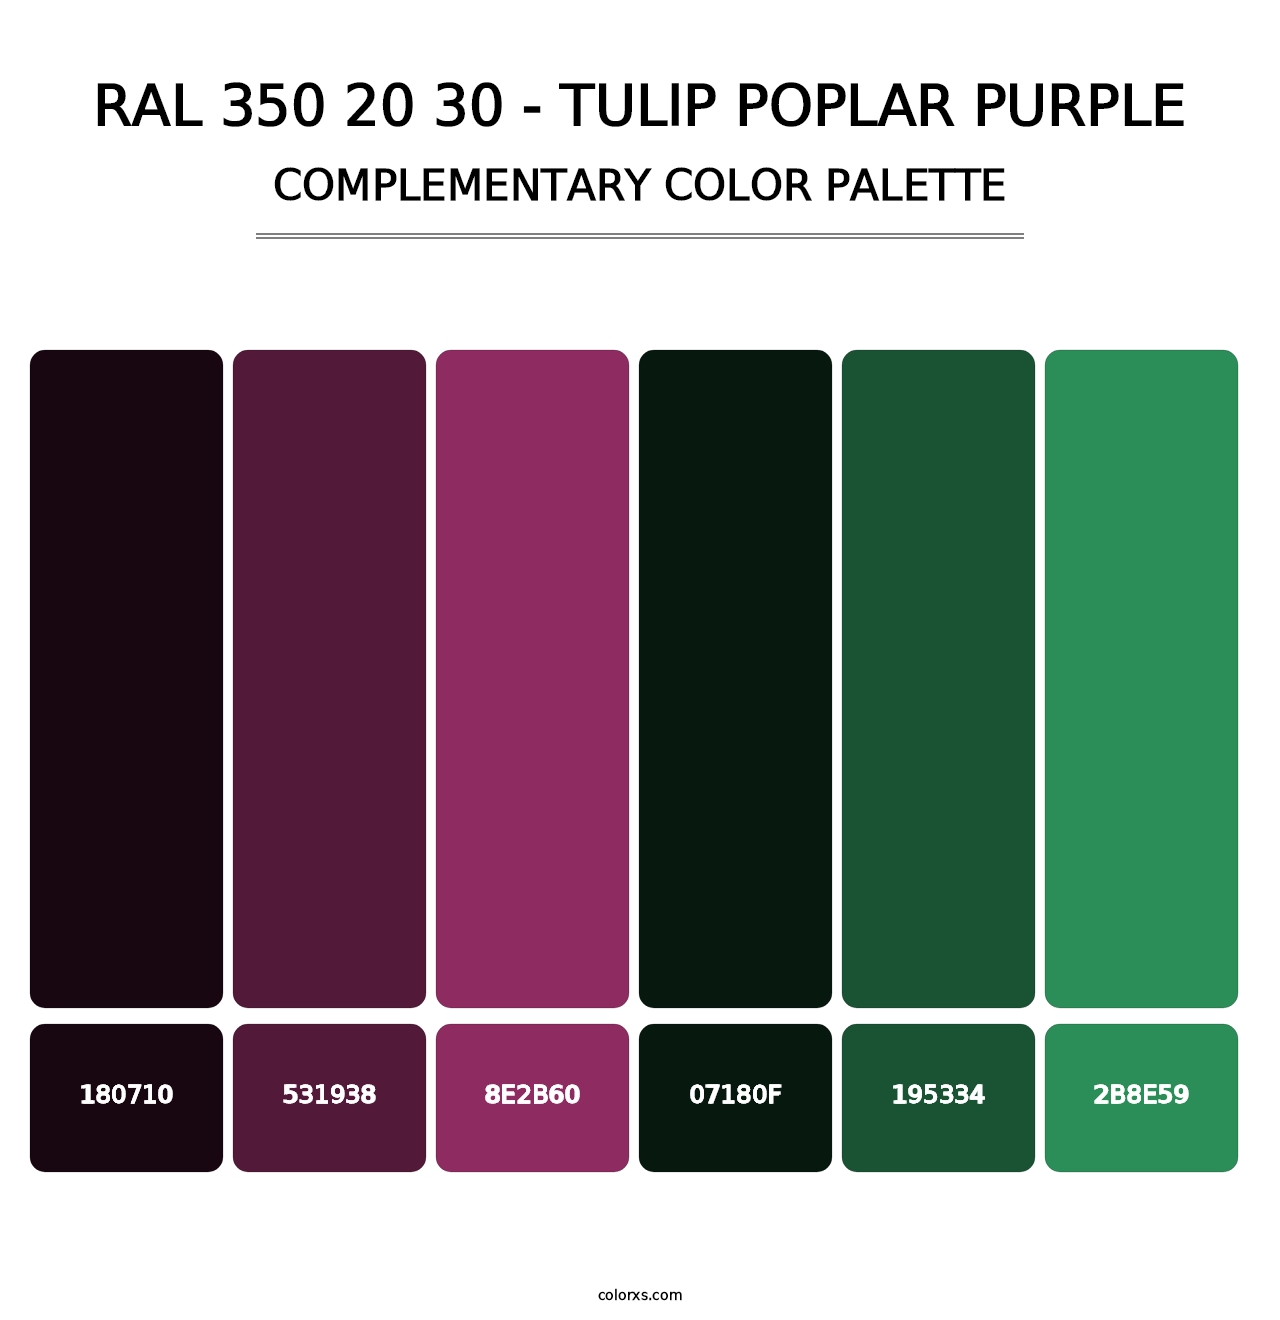 RAL 350 20 30 - Tulip Poplar Purple - Complementary Color Palette